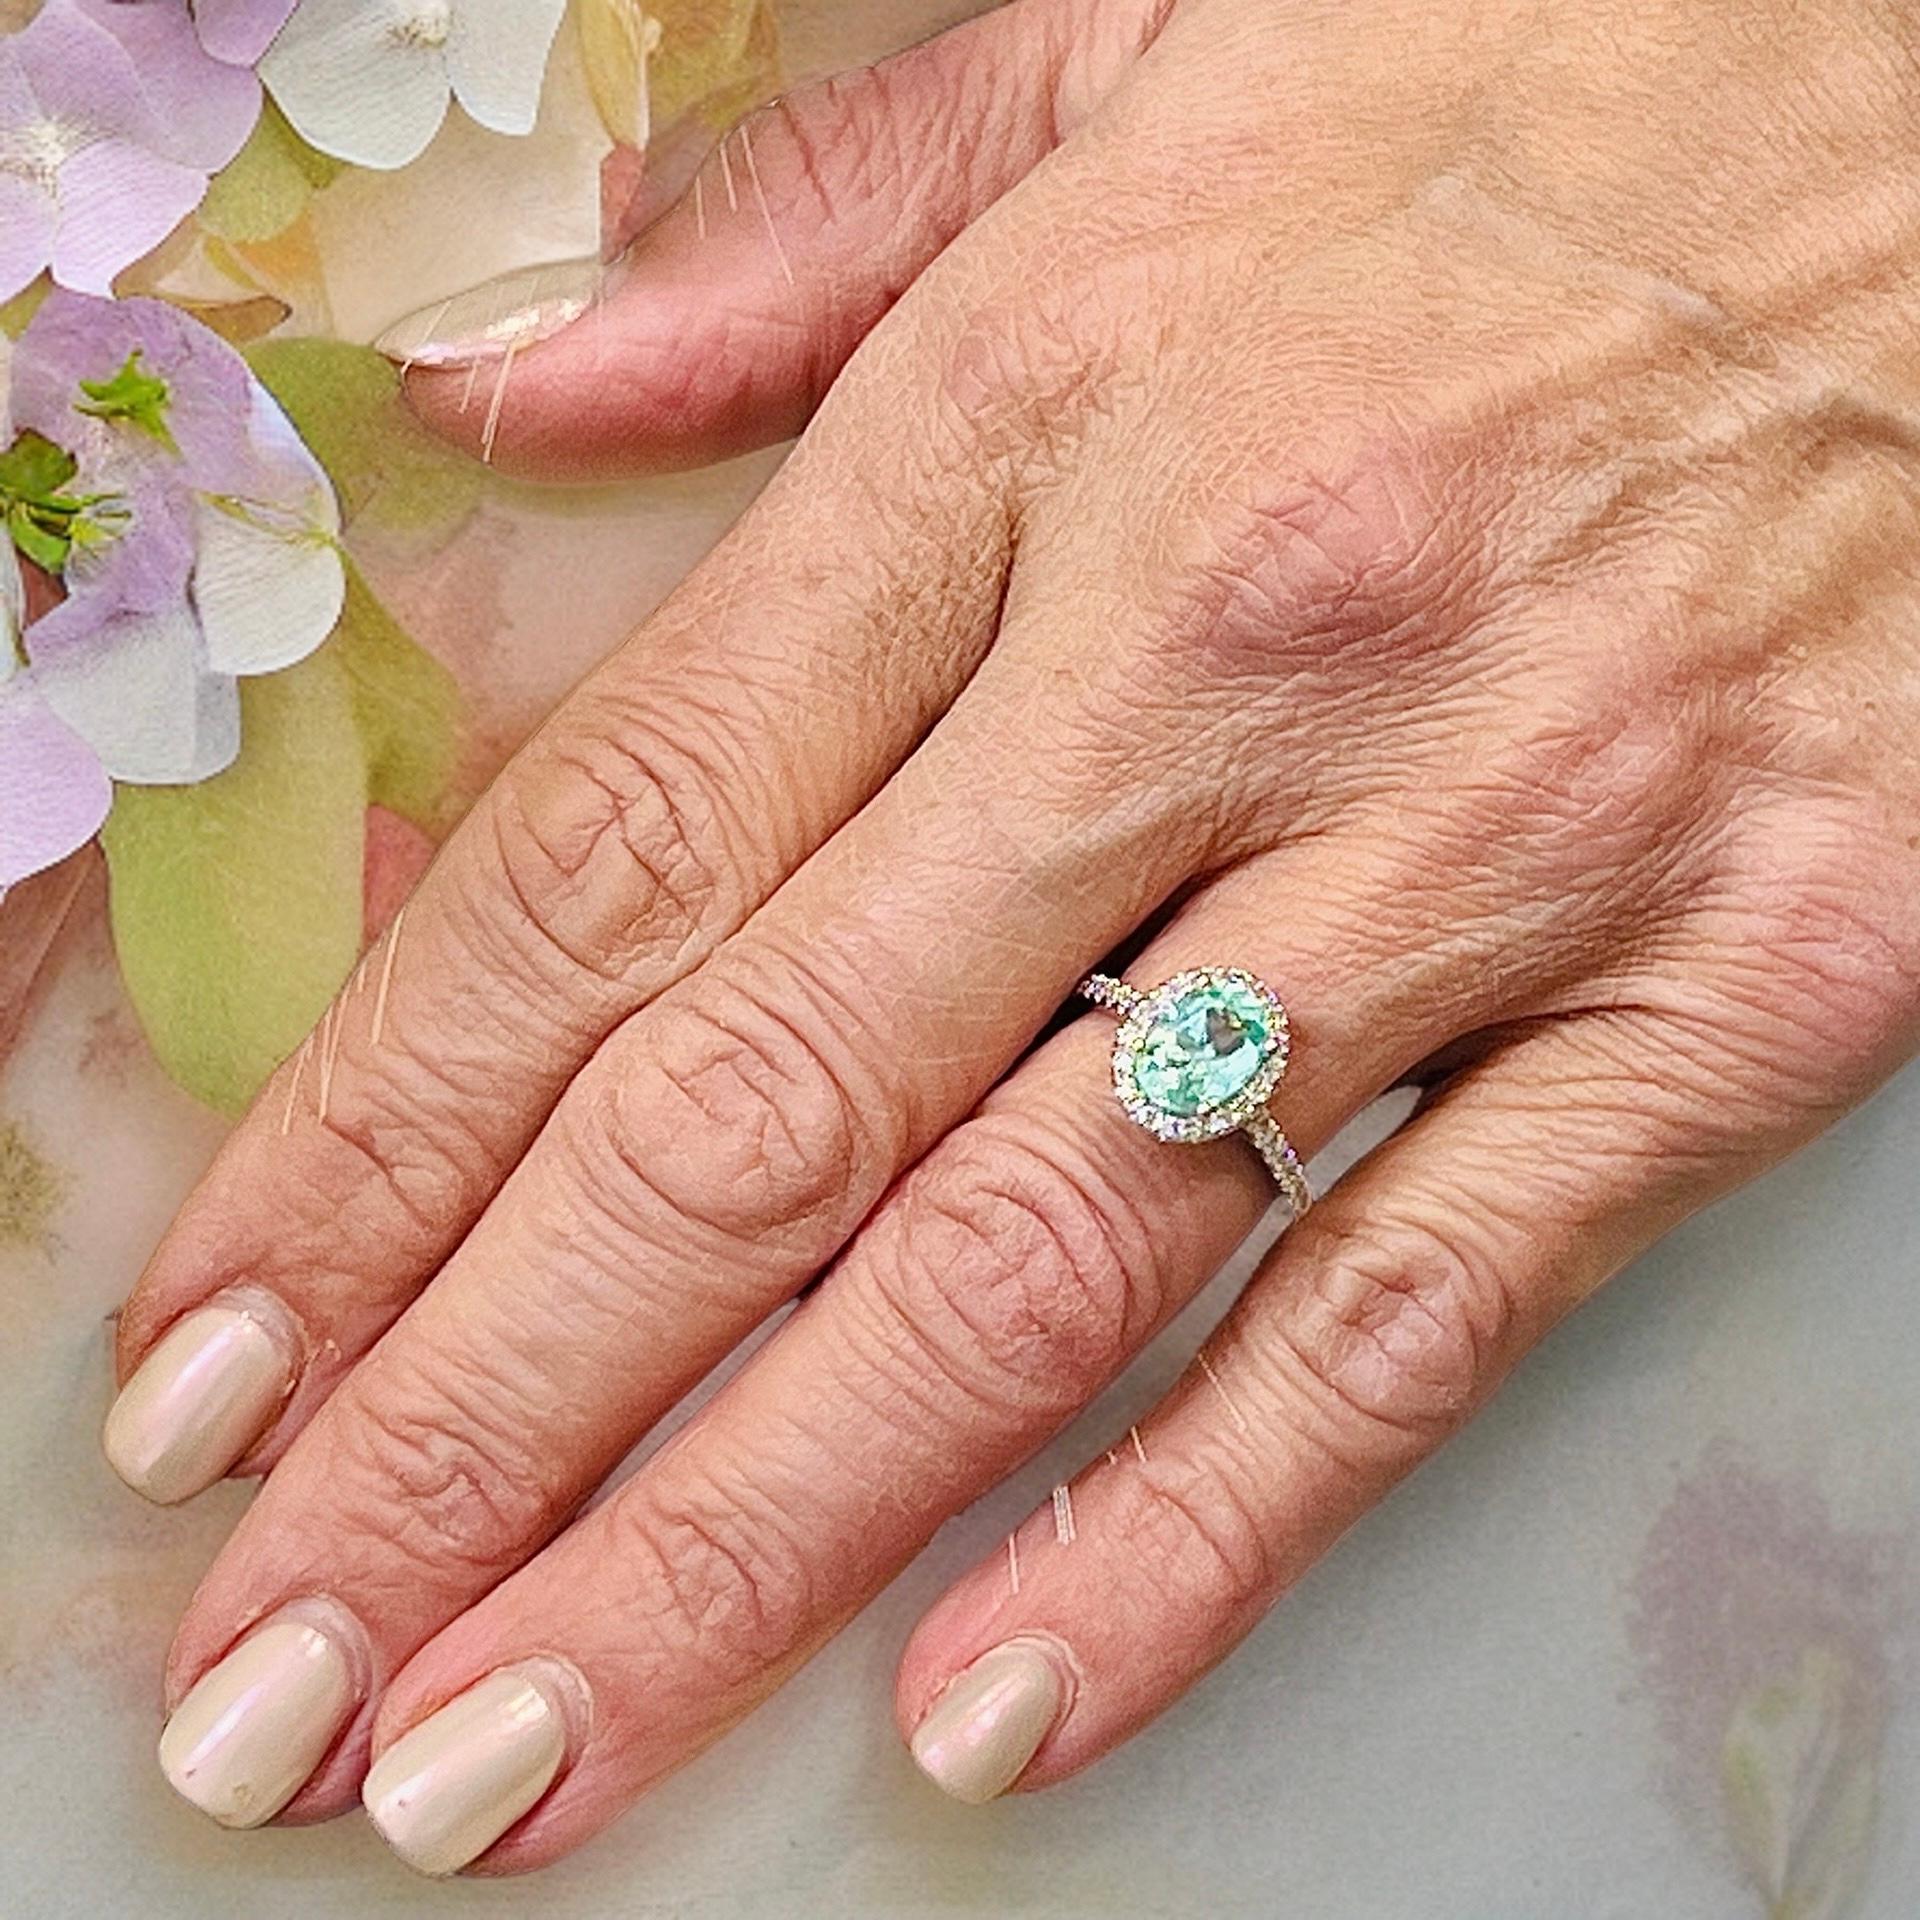 Natural Fine Quality Colombian Emerald Diamond Ring Size 6.5 14k W Gold 2.98 TCW Certified $6,790 218110

Nothing says, “I Love you” more than Diamonds and Pearls!

This Emerald ring has been Certified, Inspected, and Appraised by Gemological